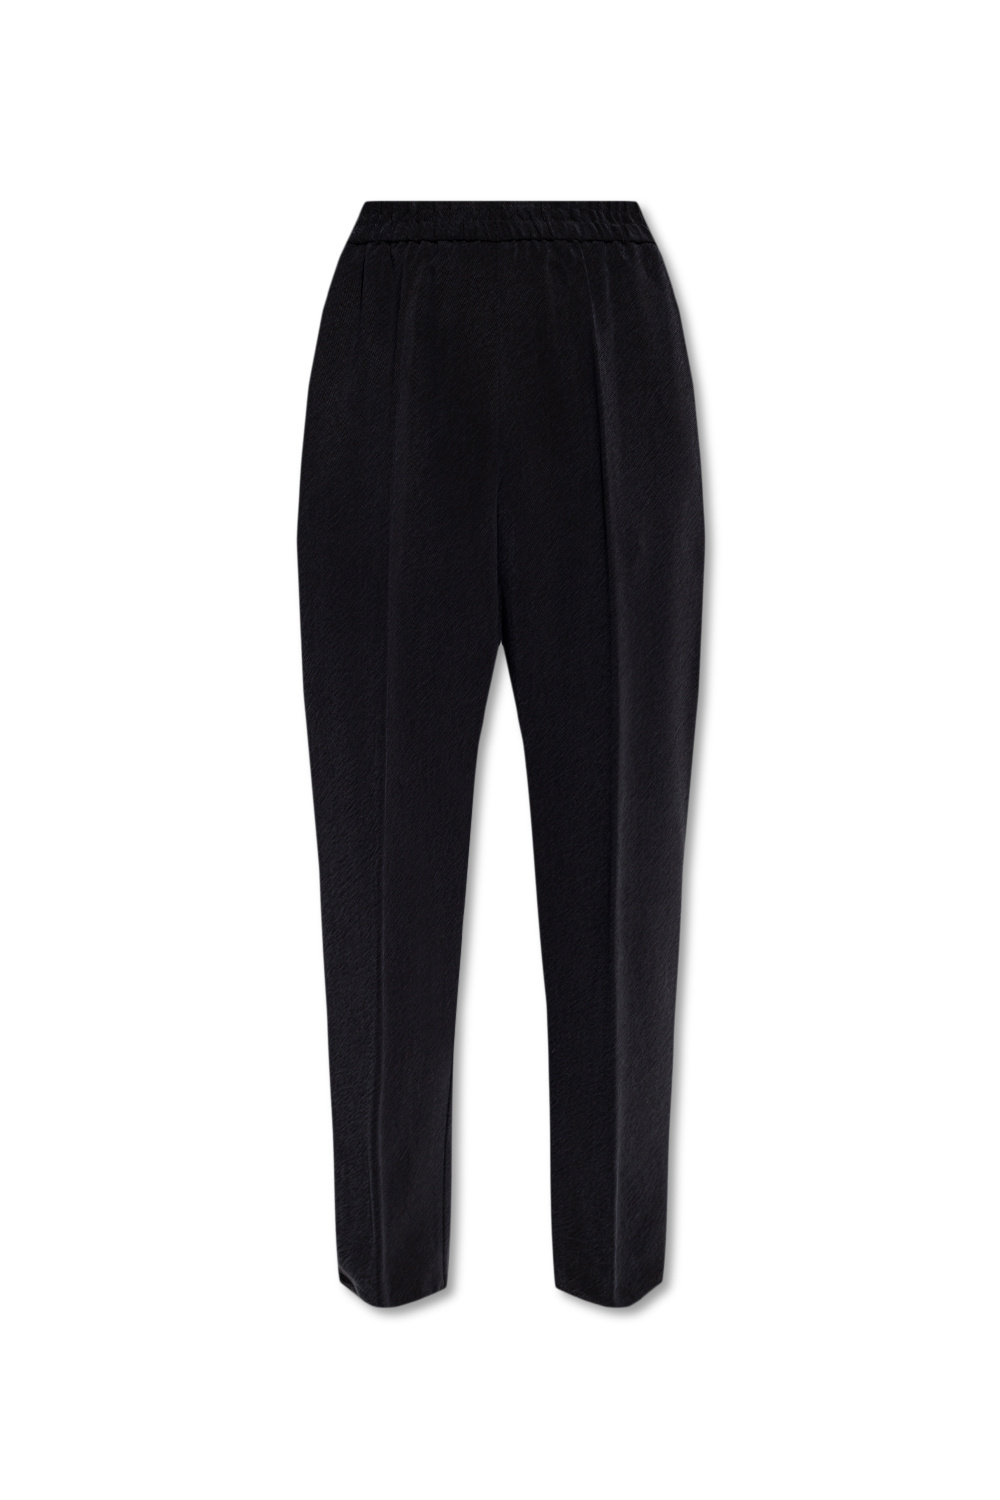 forte_forte Pleat-front trousers